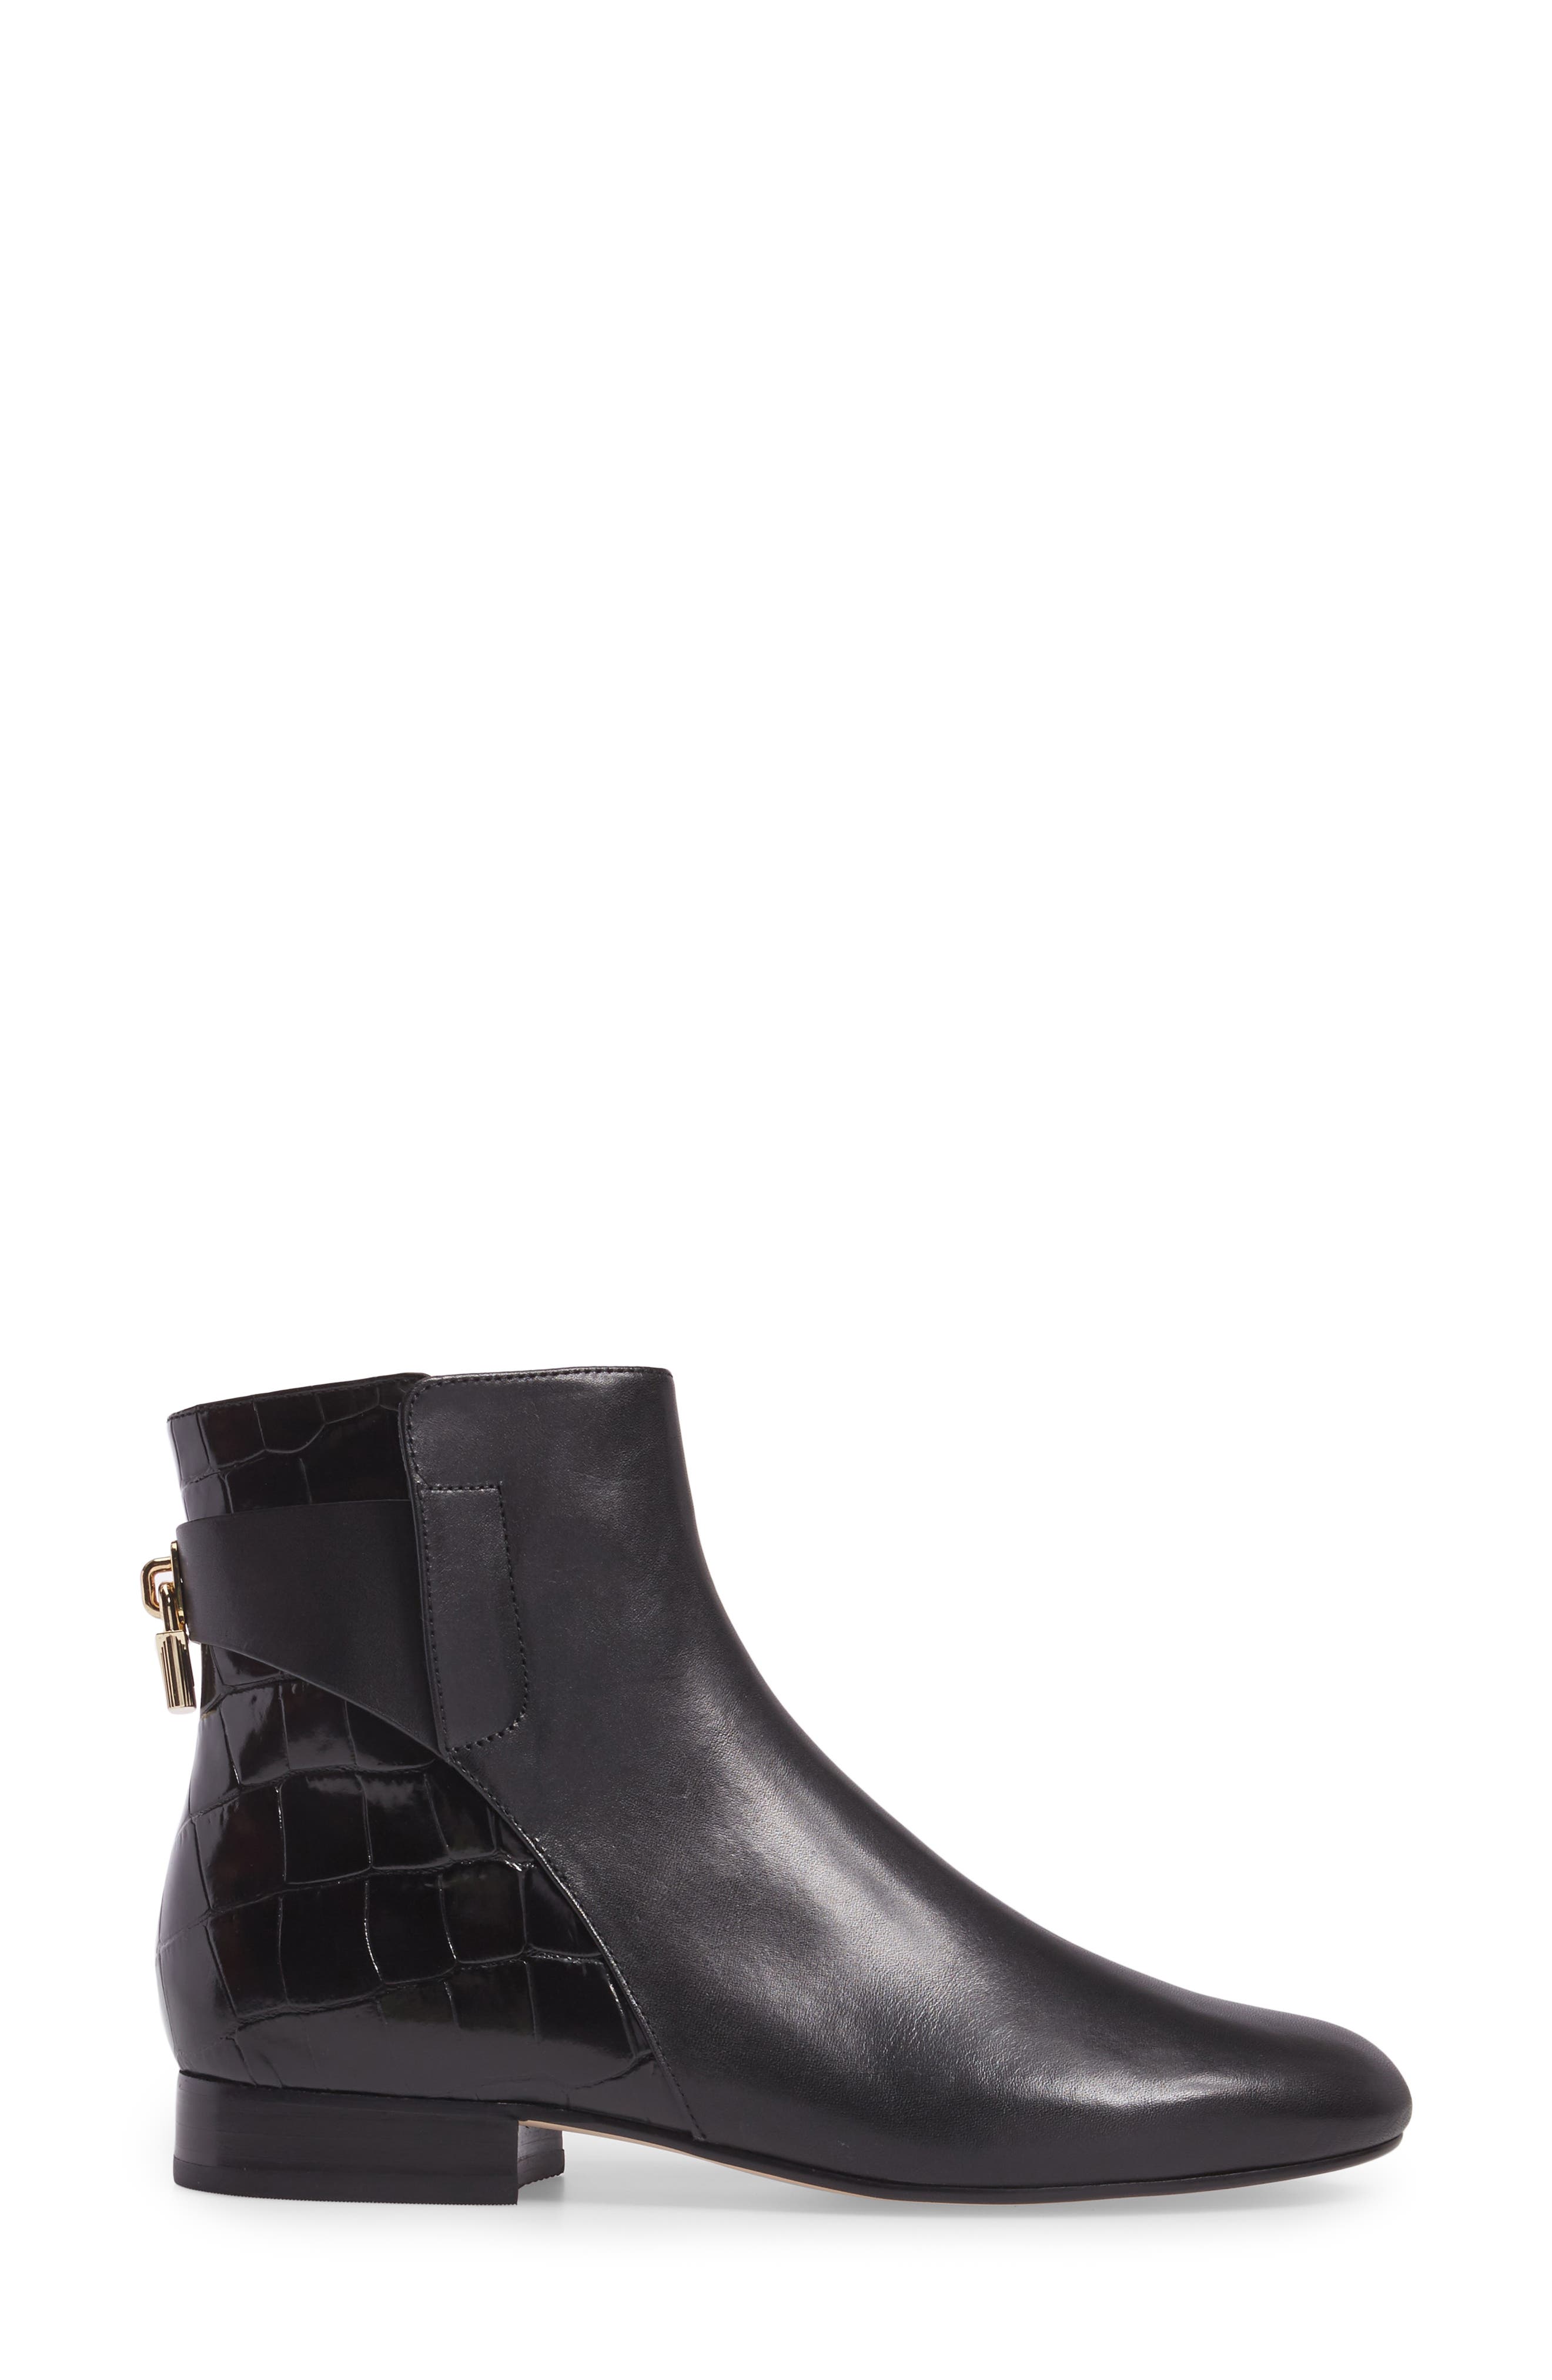 Mira Croc Embossed Leather Flat Boot 